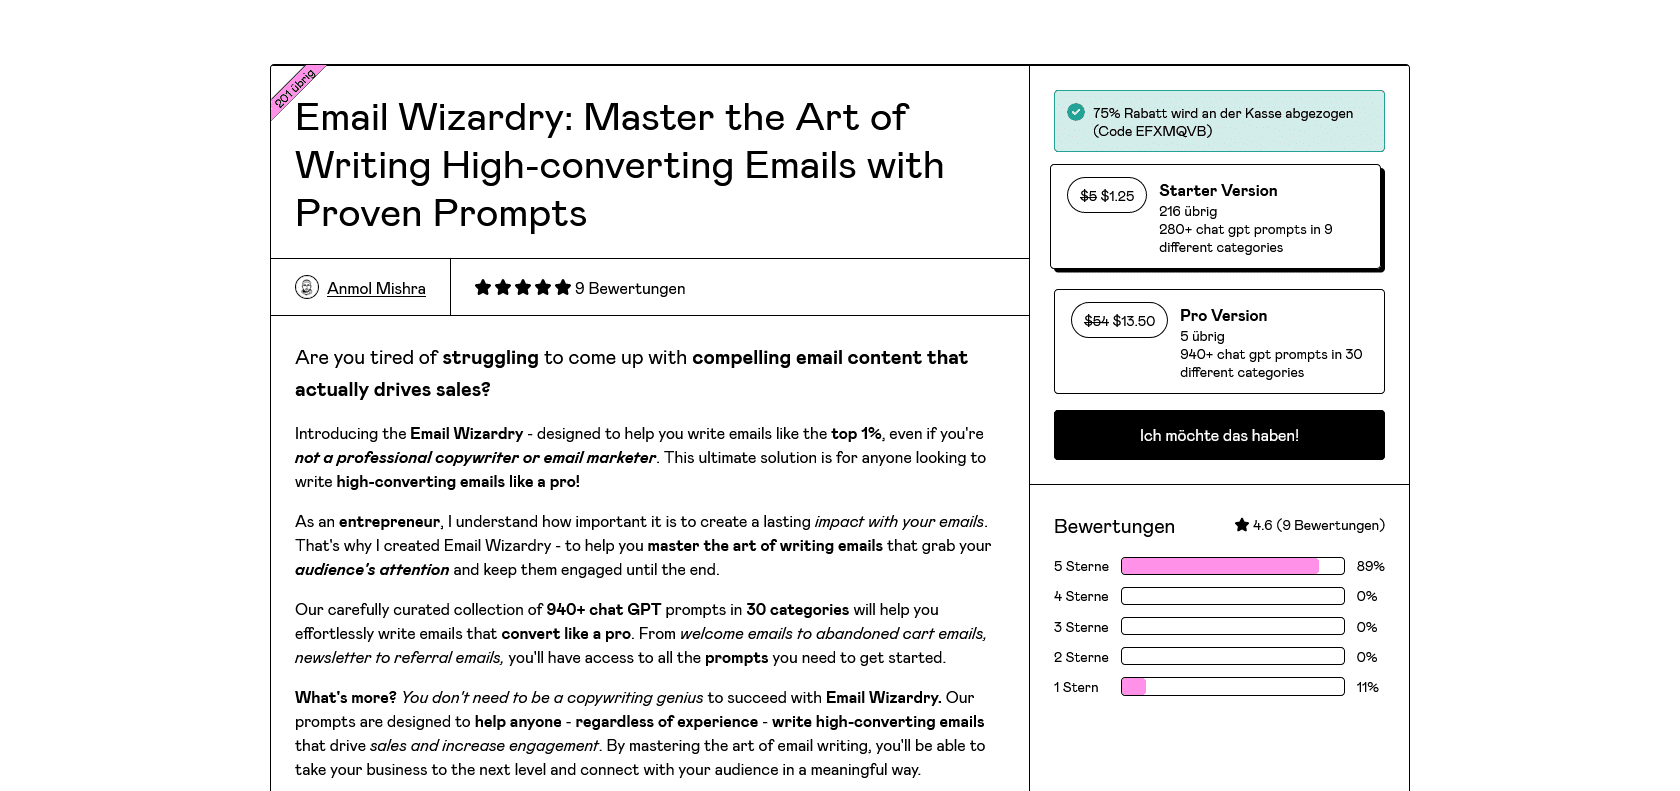 Screenshot of Email Wizardry: Prompts for Conv. Emails Website